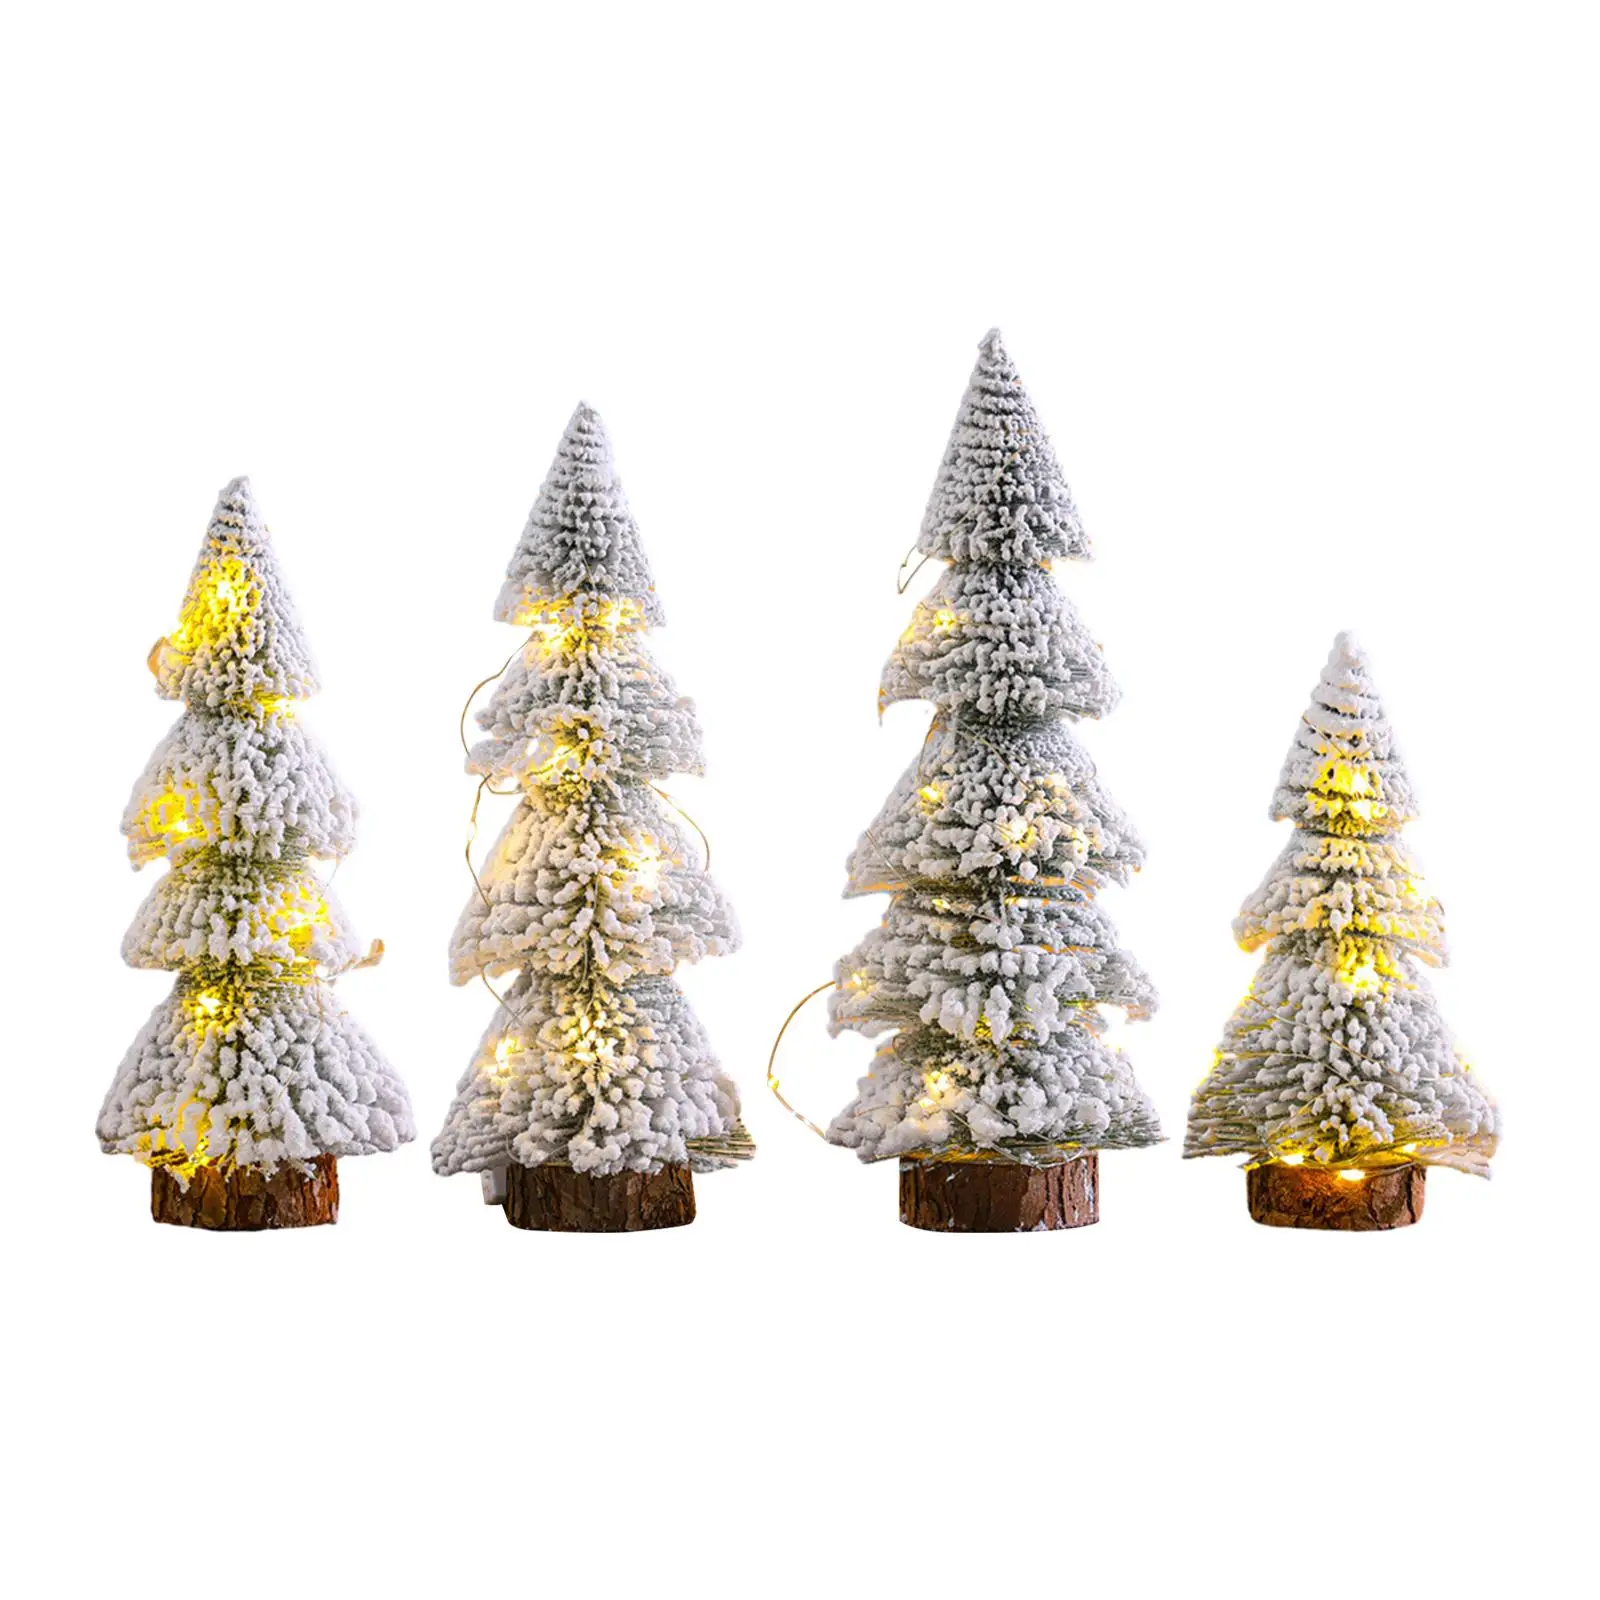 Snow Flocked Christmas Tree Ornament Display Party with LED Lights Tabletop Christmas Tree for Desk Holiday Indoor Shelf Decor